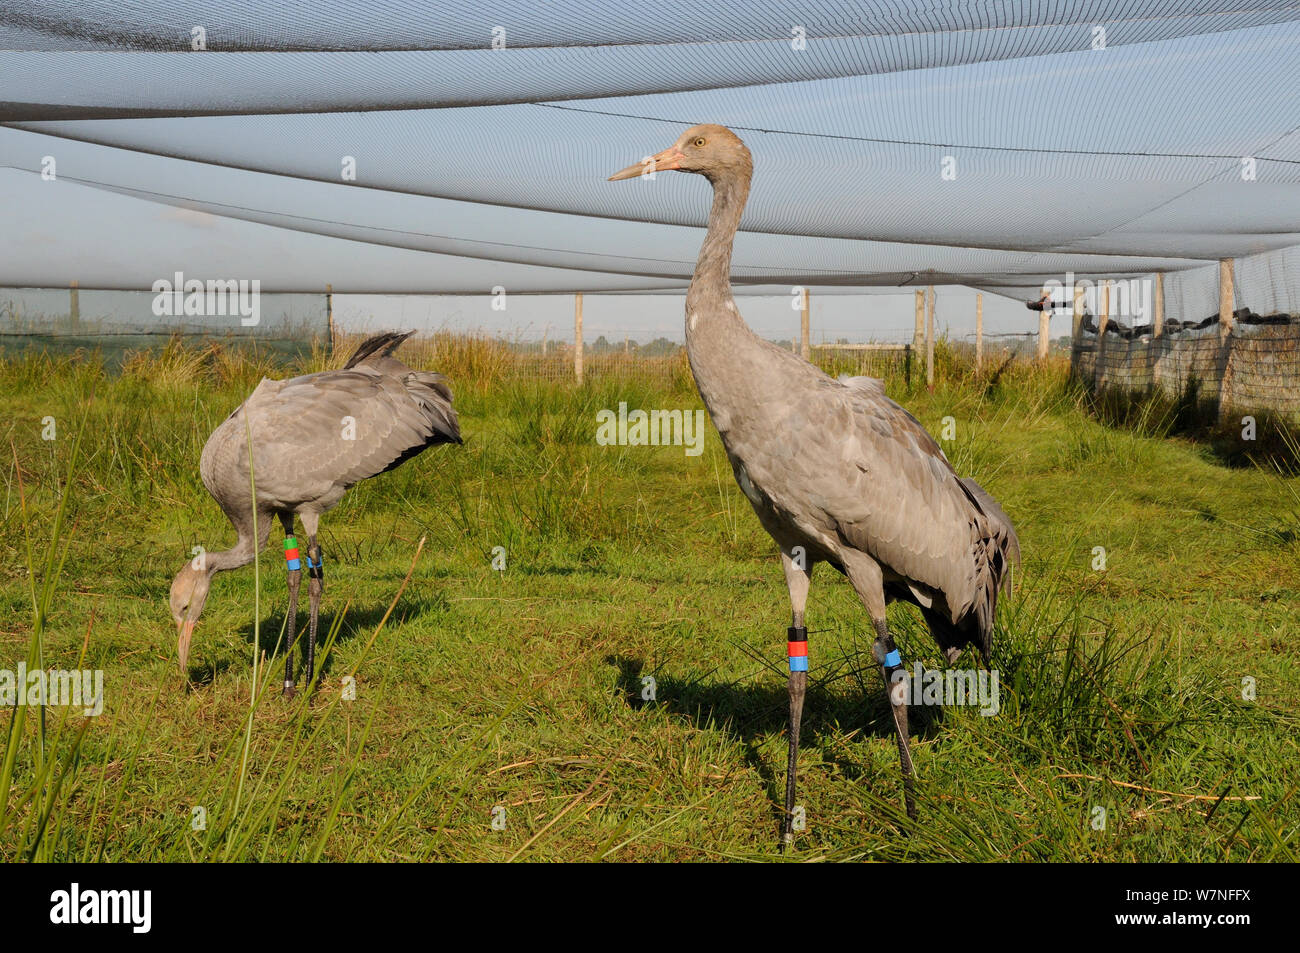 Two young Common / Eurasian cranes (Grus grus) in a netted aviary before being released as part of a reintroduction program, Somerset Levels, England, UK, September 2012 Stock Photo